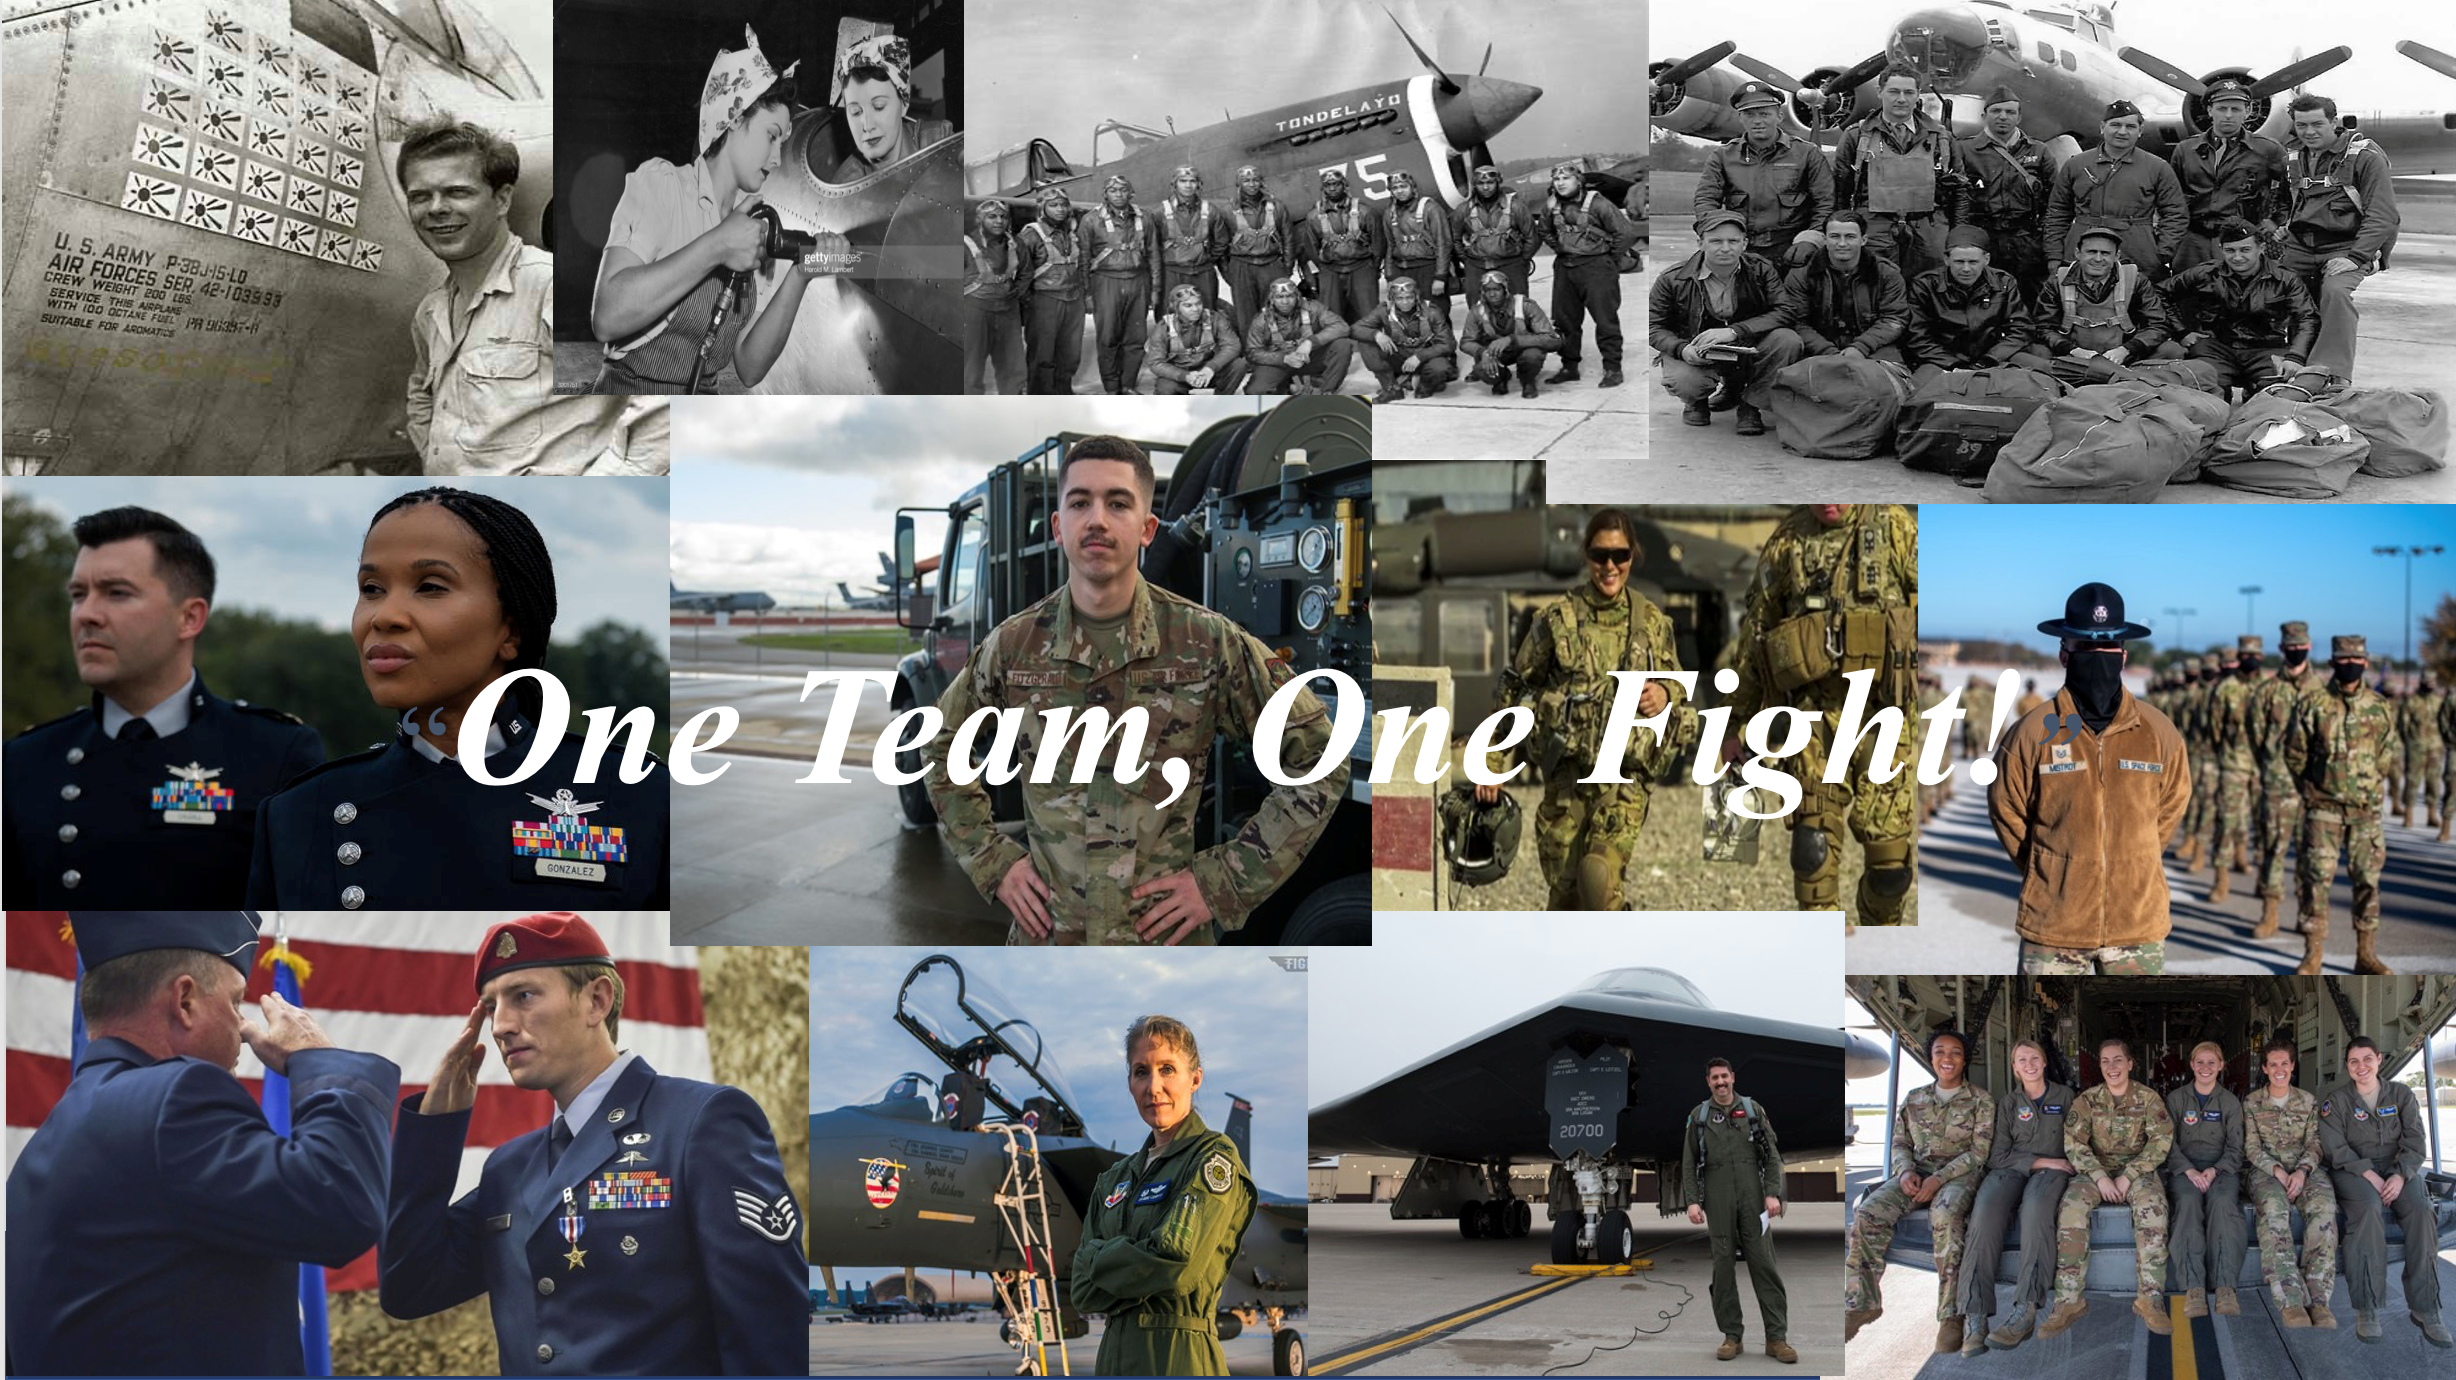 One Team, One Fight!